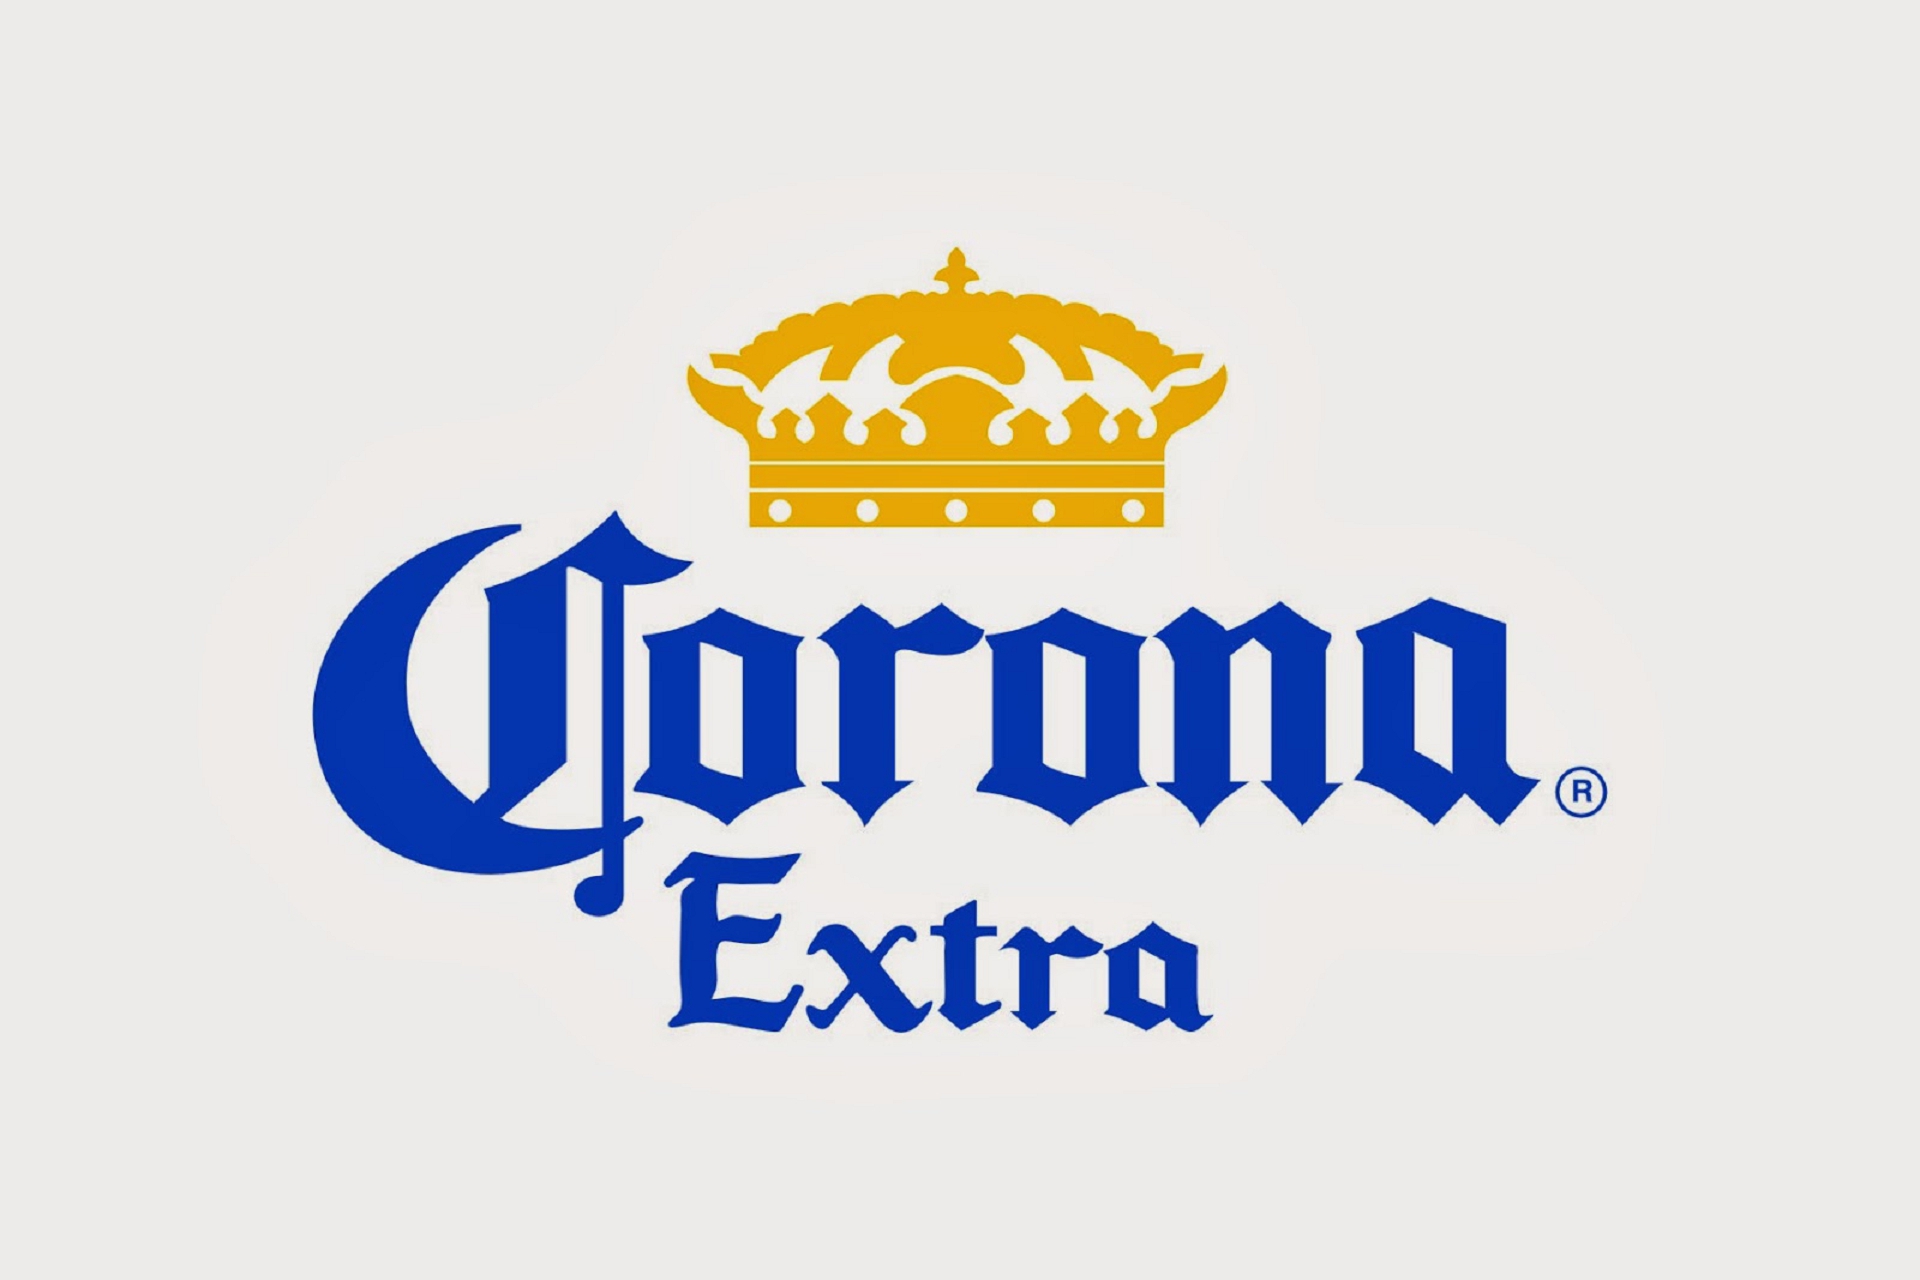 Corona Wallpapers Images Photos Pictures Backgrounds 1920x1280